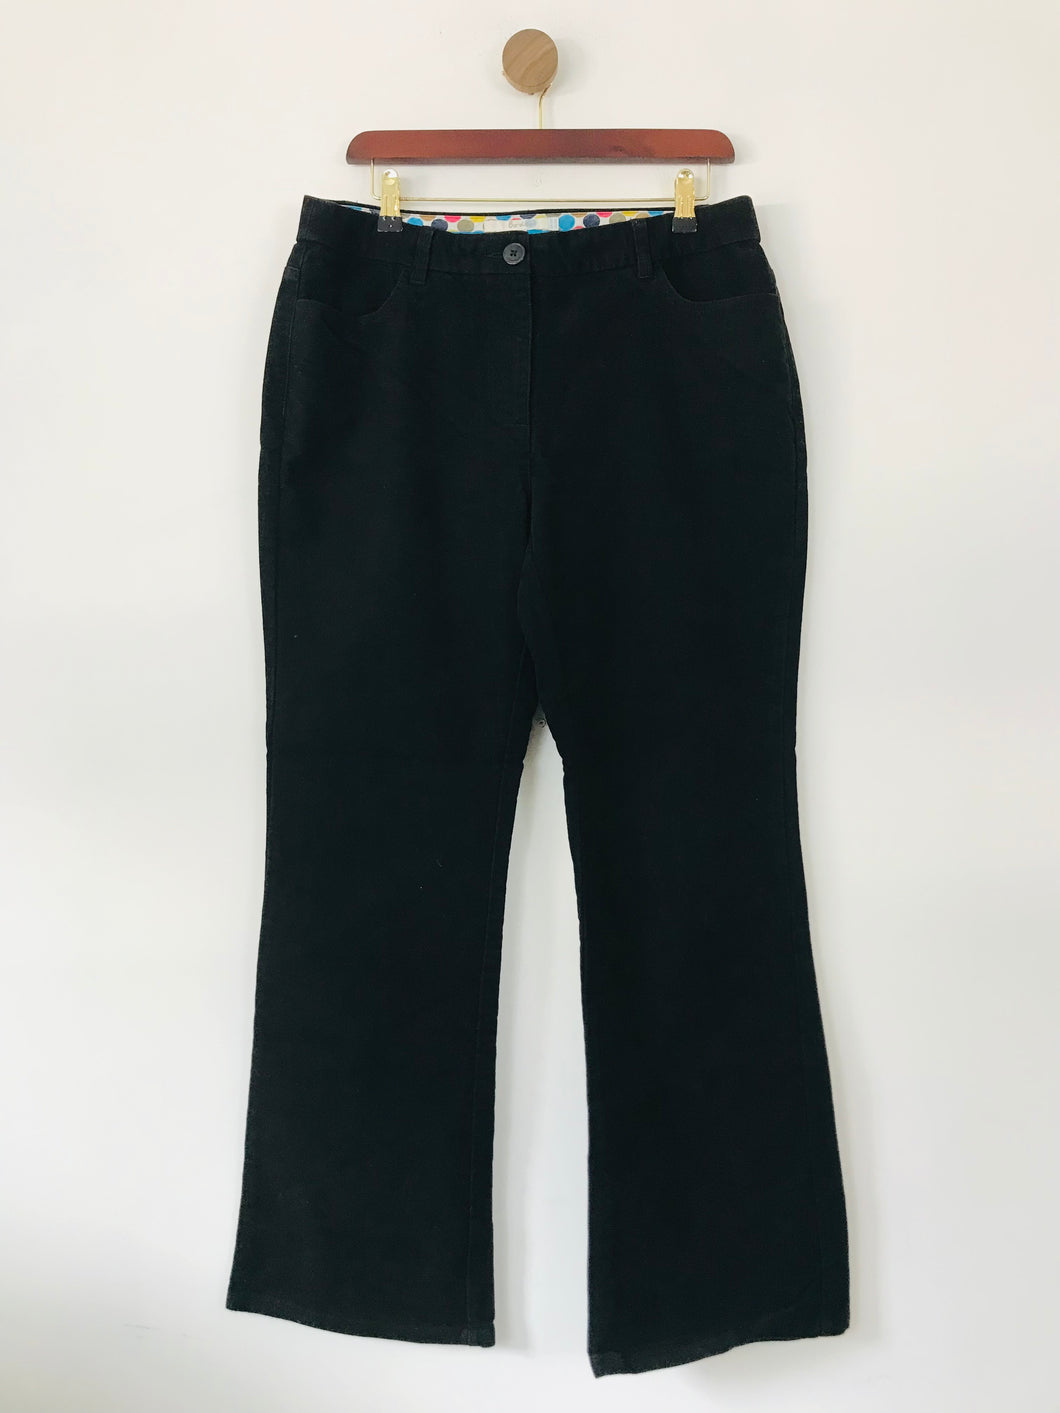 Boden Women's Chinos Trousers | UK14 | Black